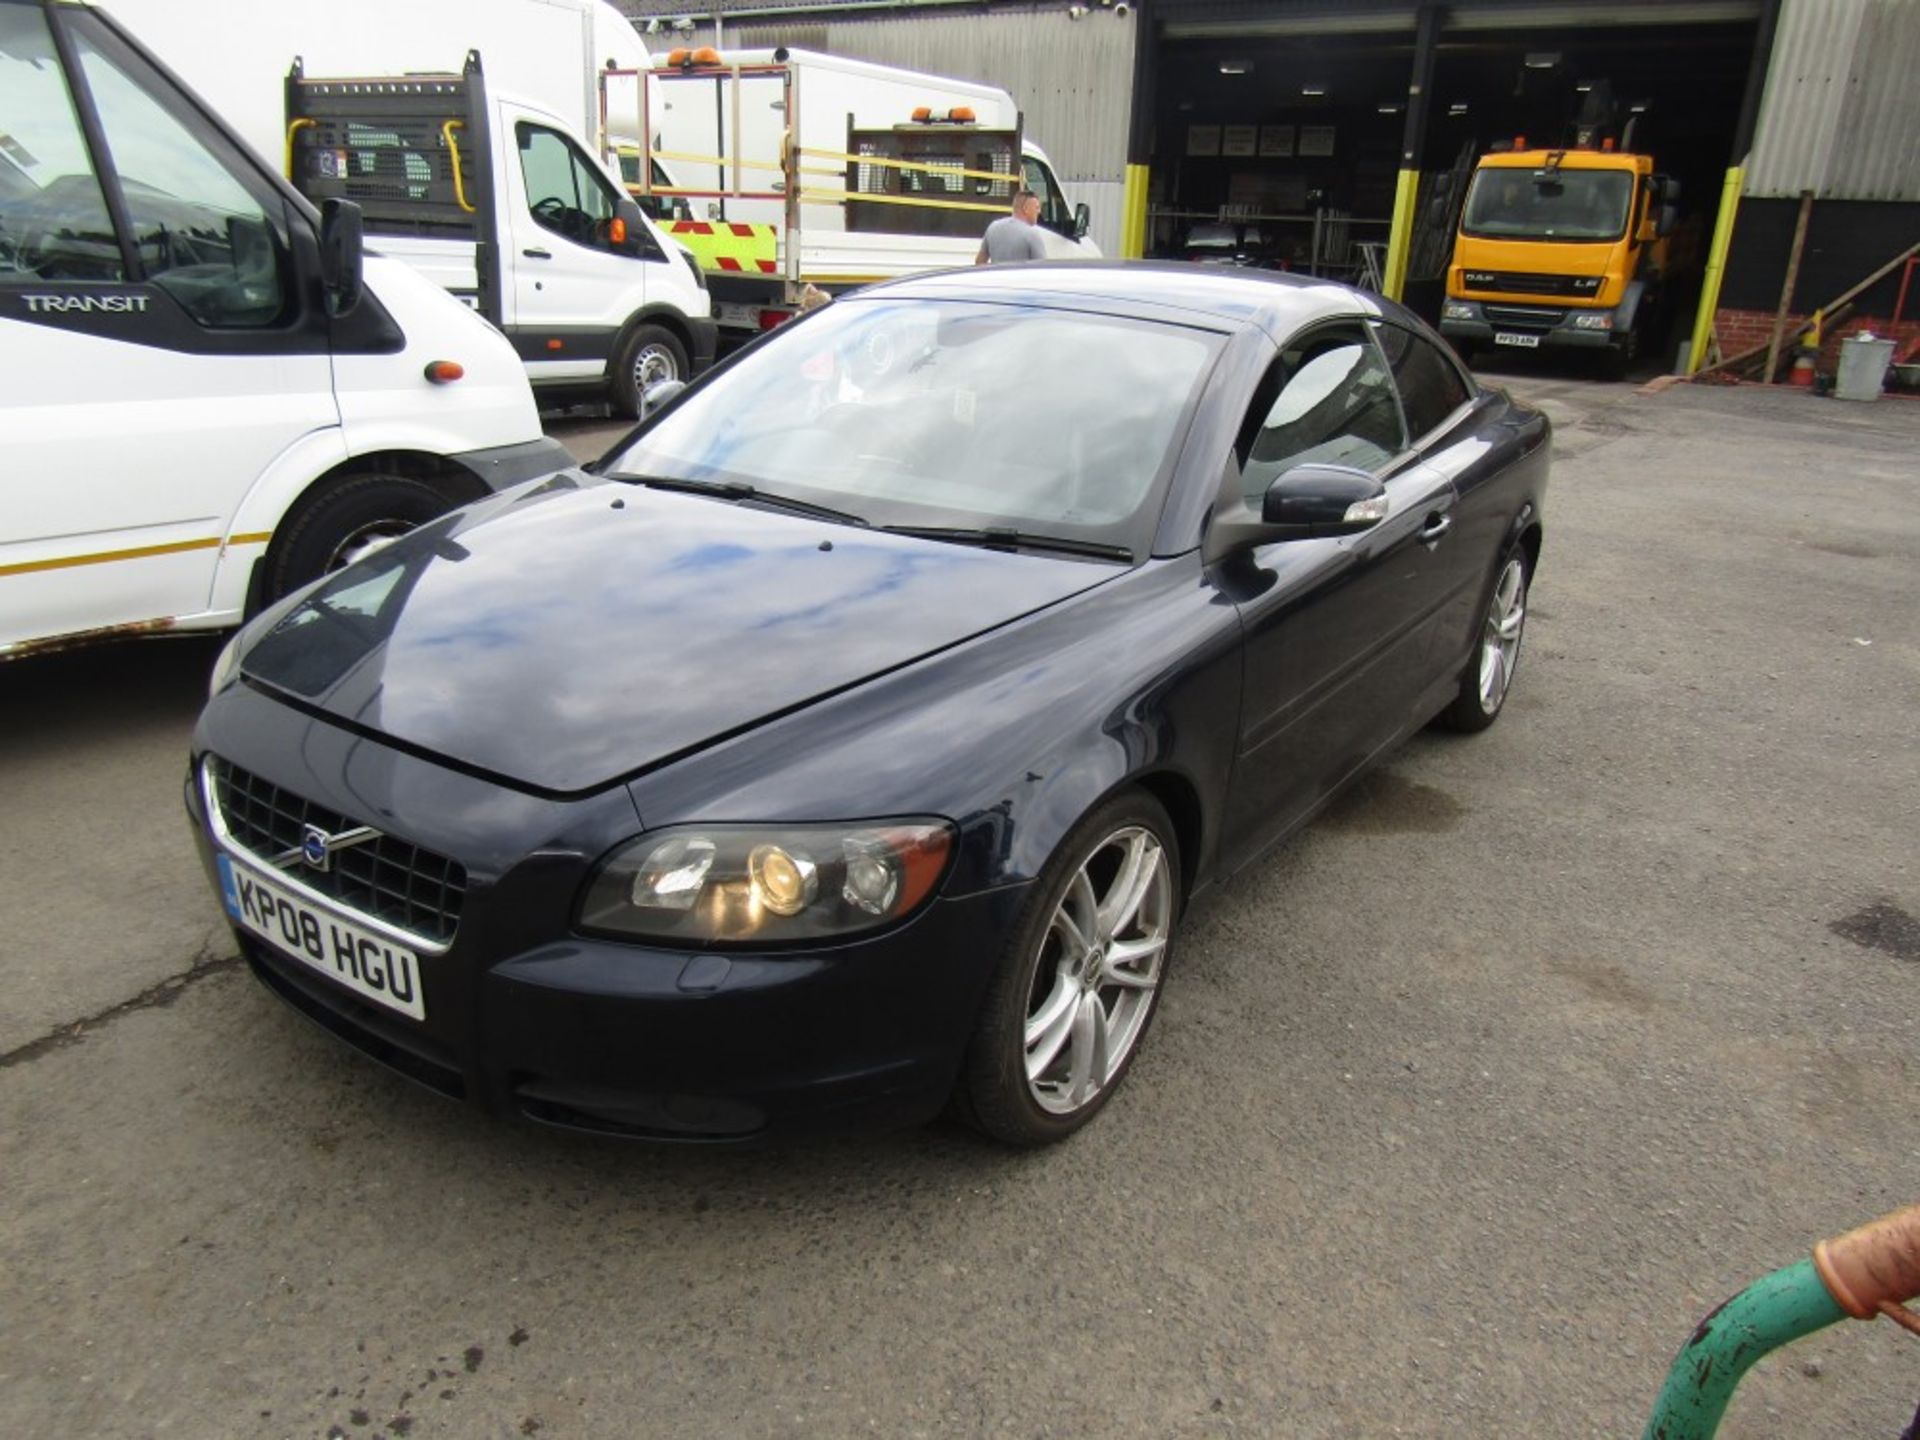 08 reg VOLVO C70 SE LUX AUTO CONVERTIBLE, 1ST REG 04/08, TEST 05/23, 175809M, V5 HERE, 6 FORMER - Image 2 of 6